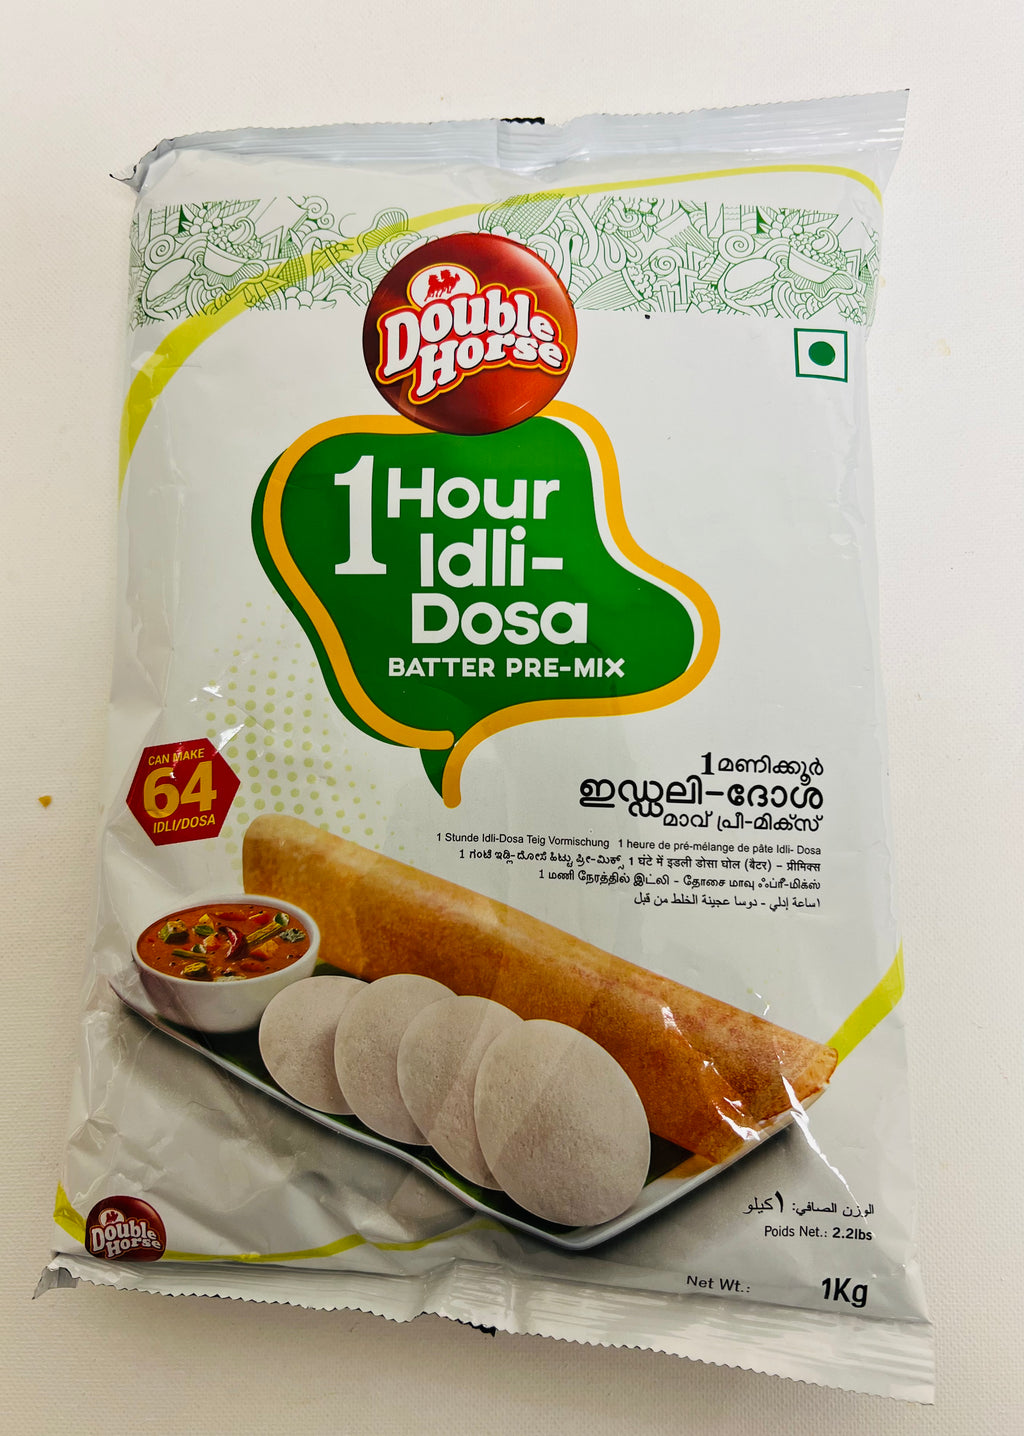 Double Horse Idli/Dosa 1 Hour Batter Pre-Mix -1 kg – South Grocery